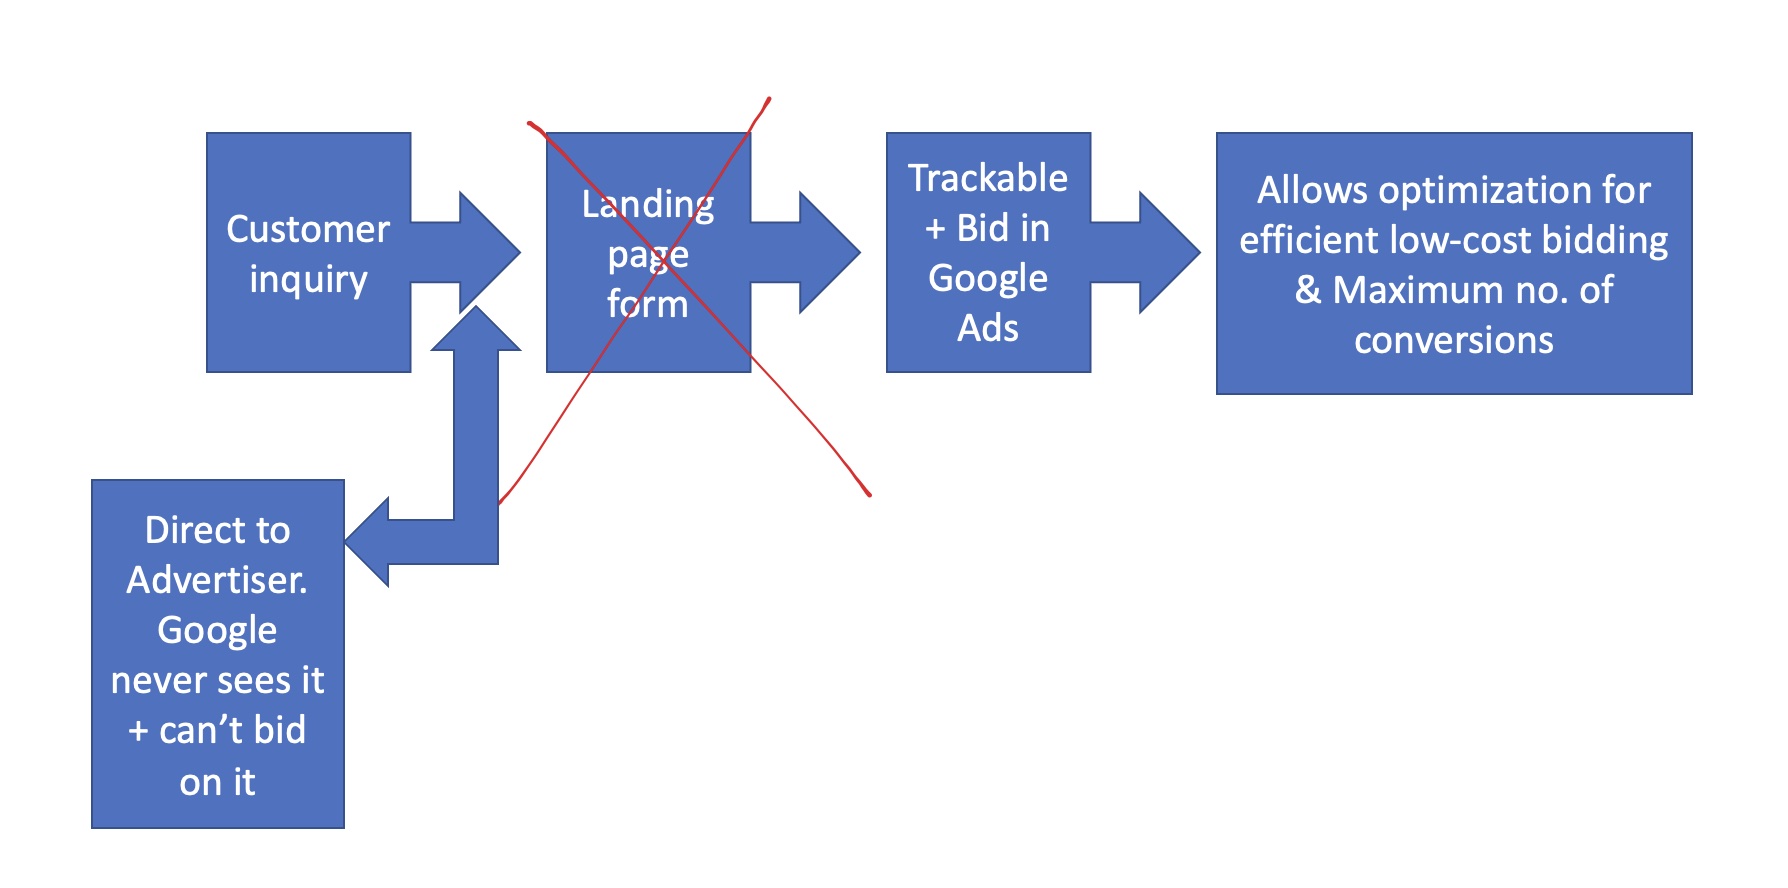 Graphic illustrates the severed linkage between Google's AI bid strategy for conversion tracking